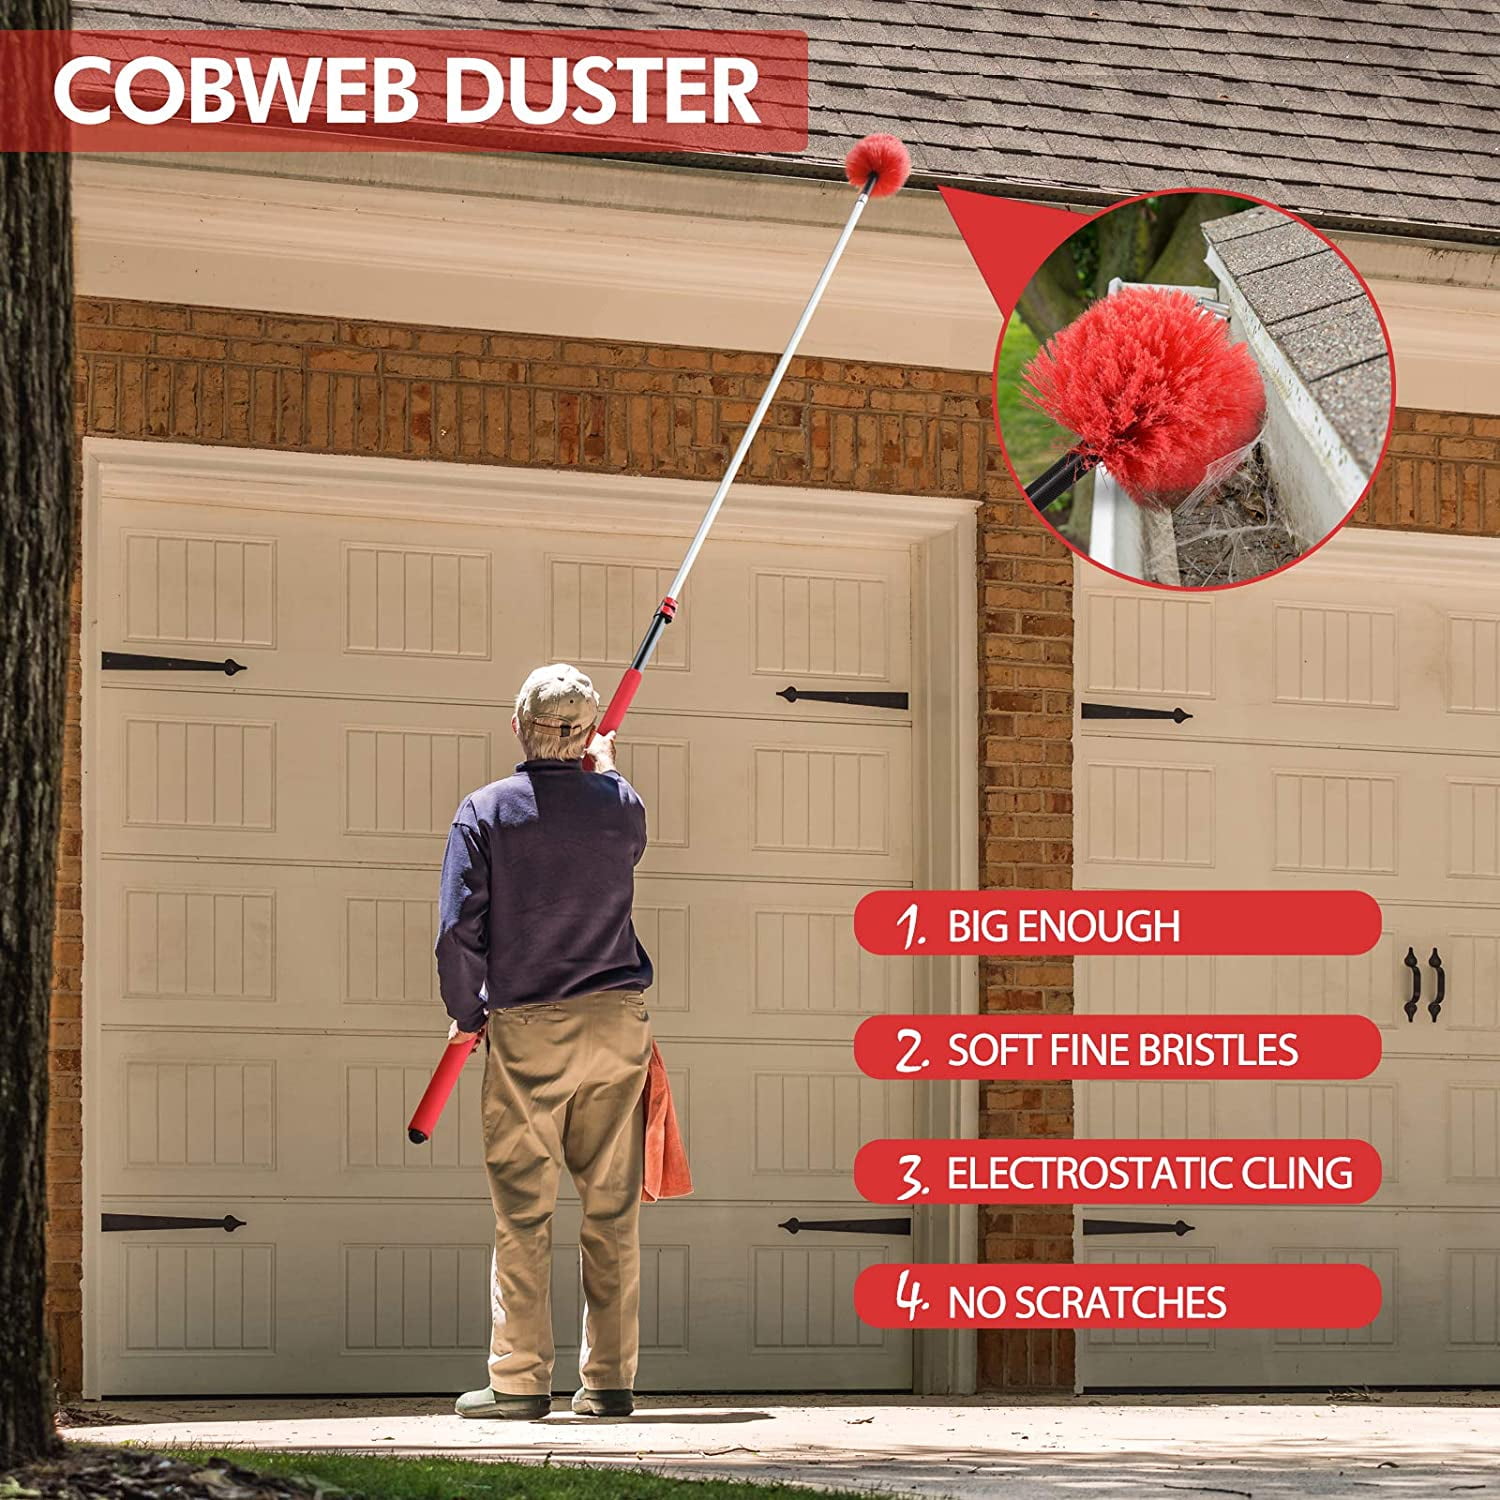 20 Foot High Reach Duster Kit with 5-12 Ft Extension Pole, Window